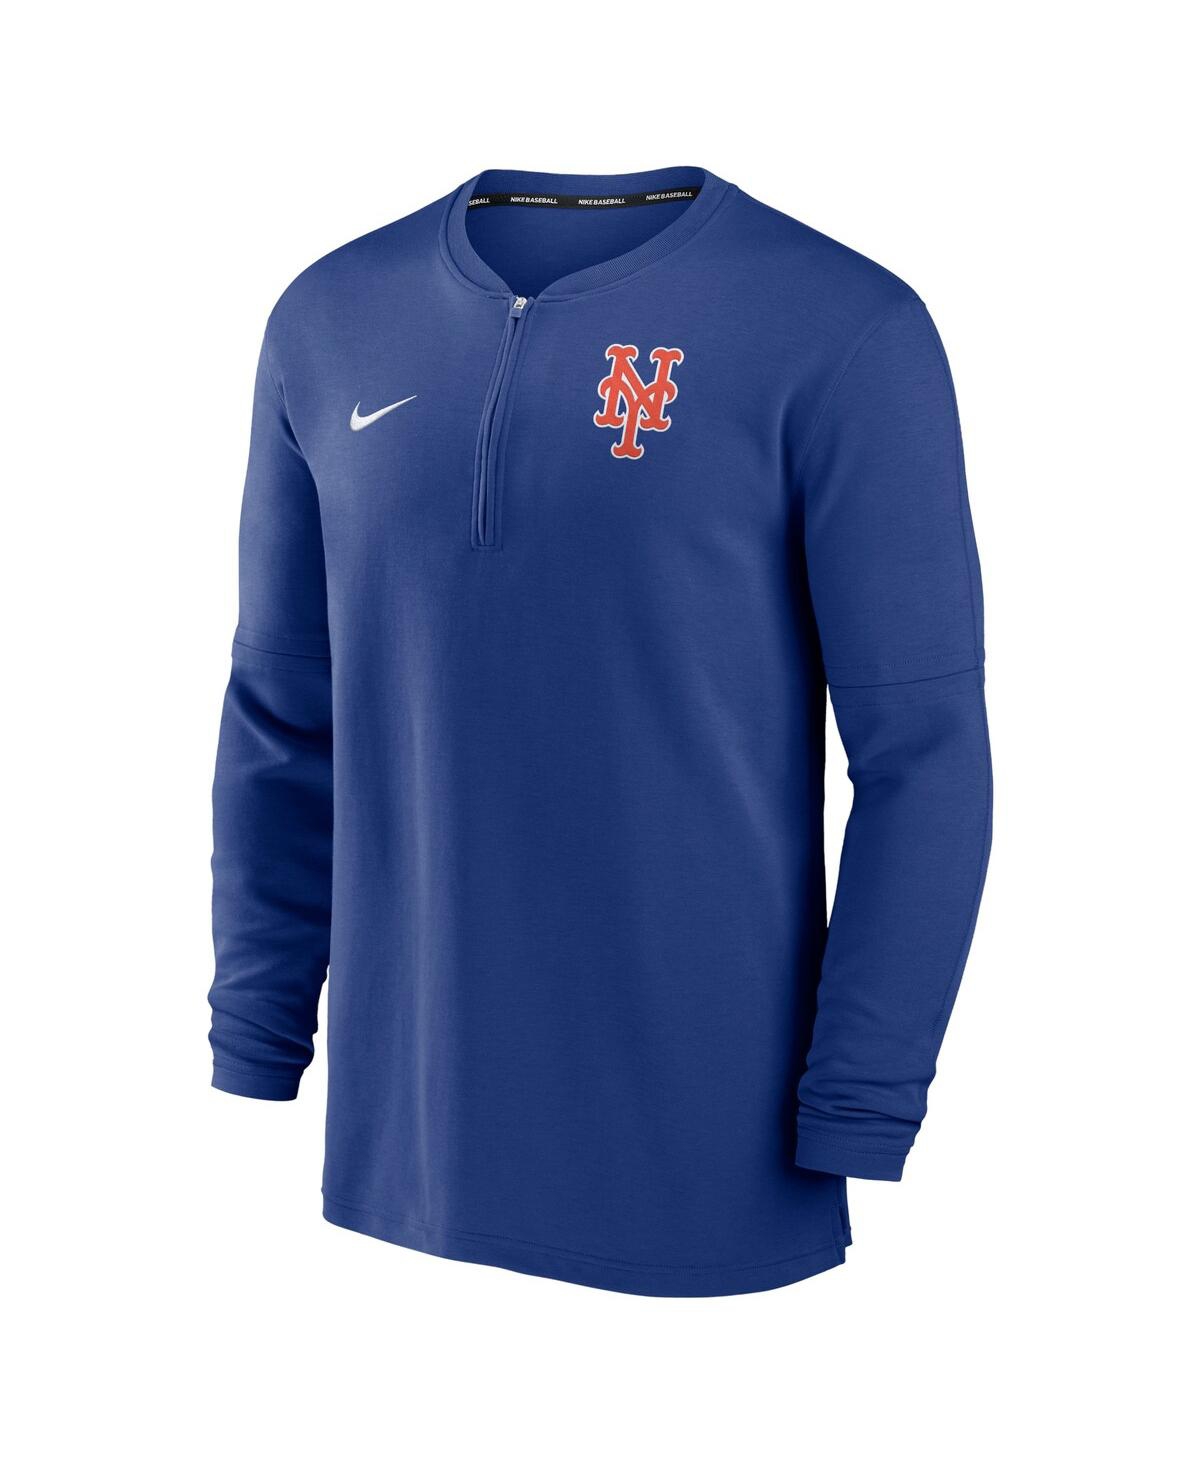 Shop Nike Men's  Royal New York Mets Authentic Collection Game Time Performance Quarter-zip Top